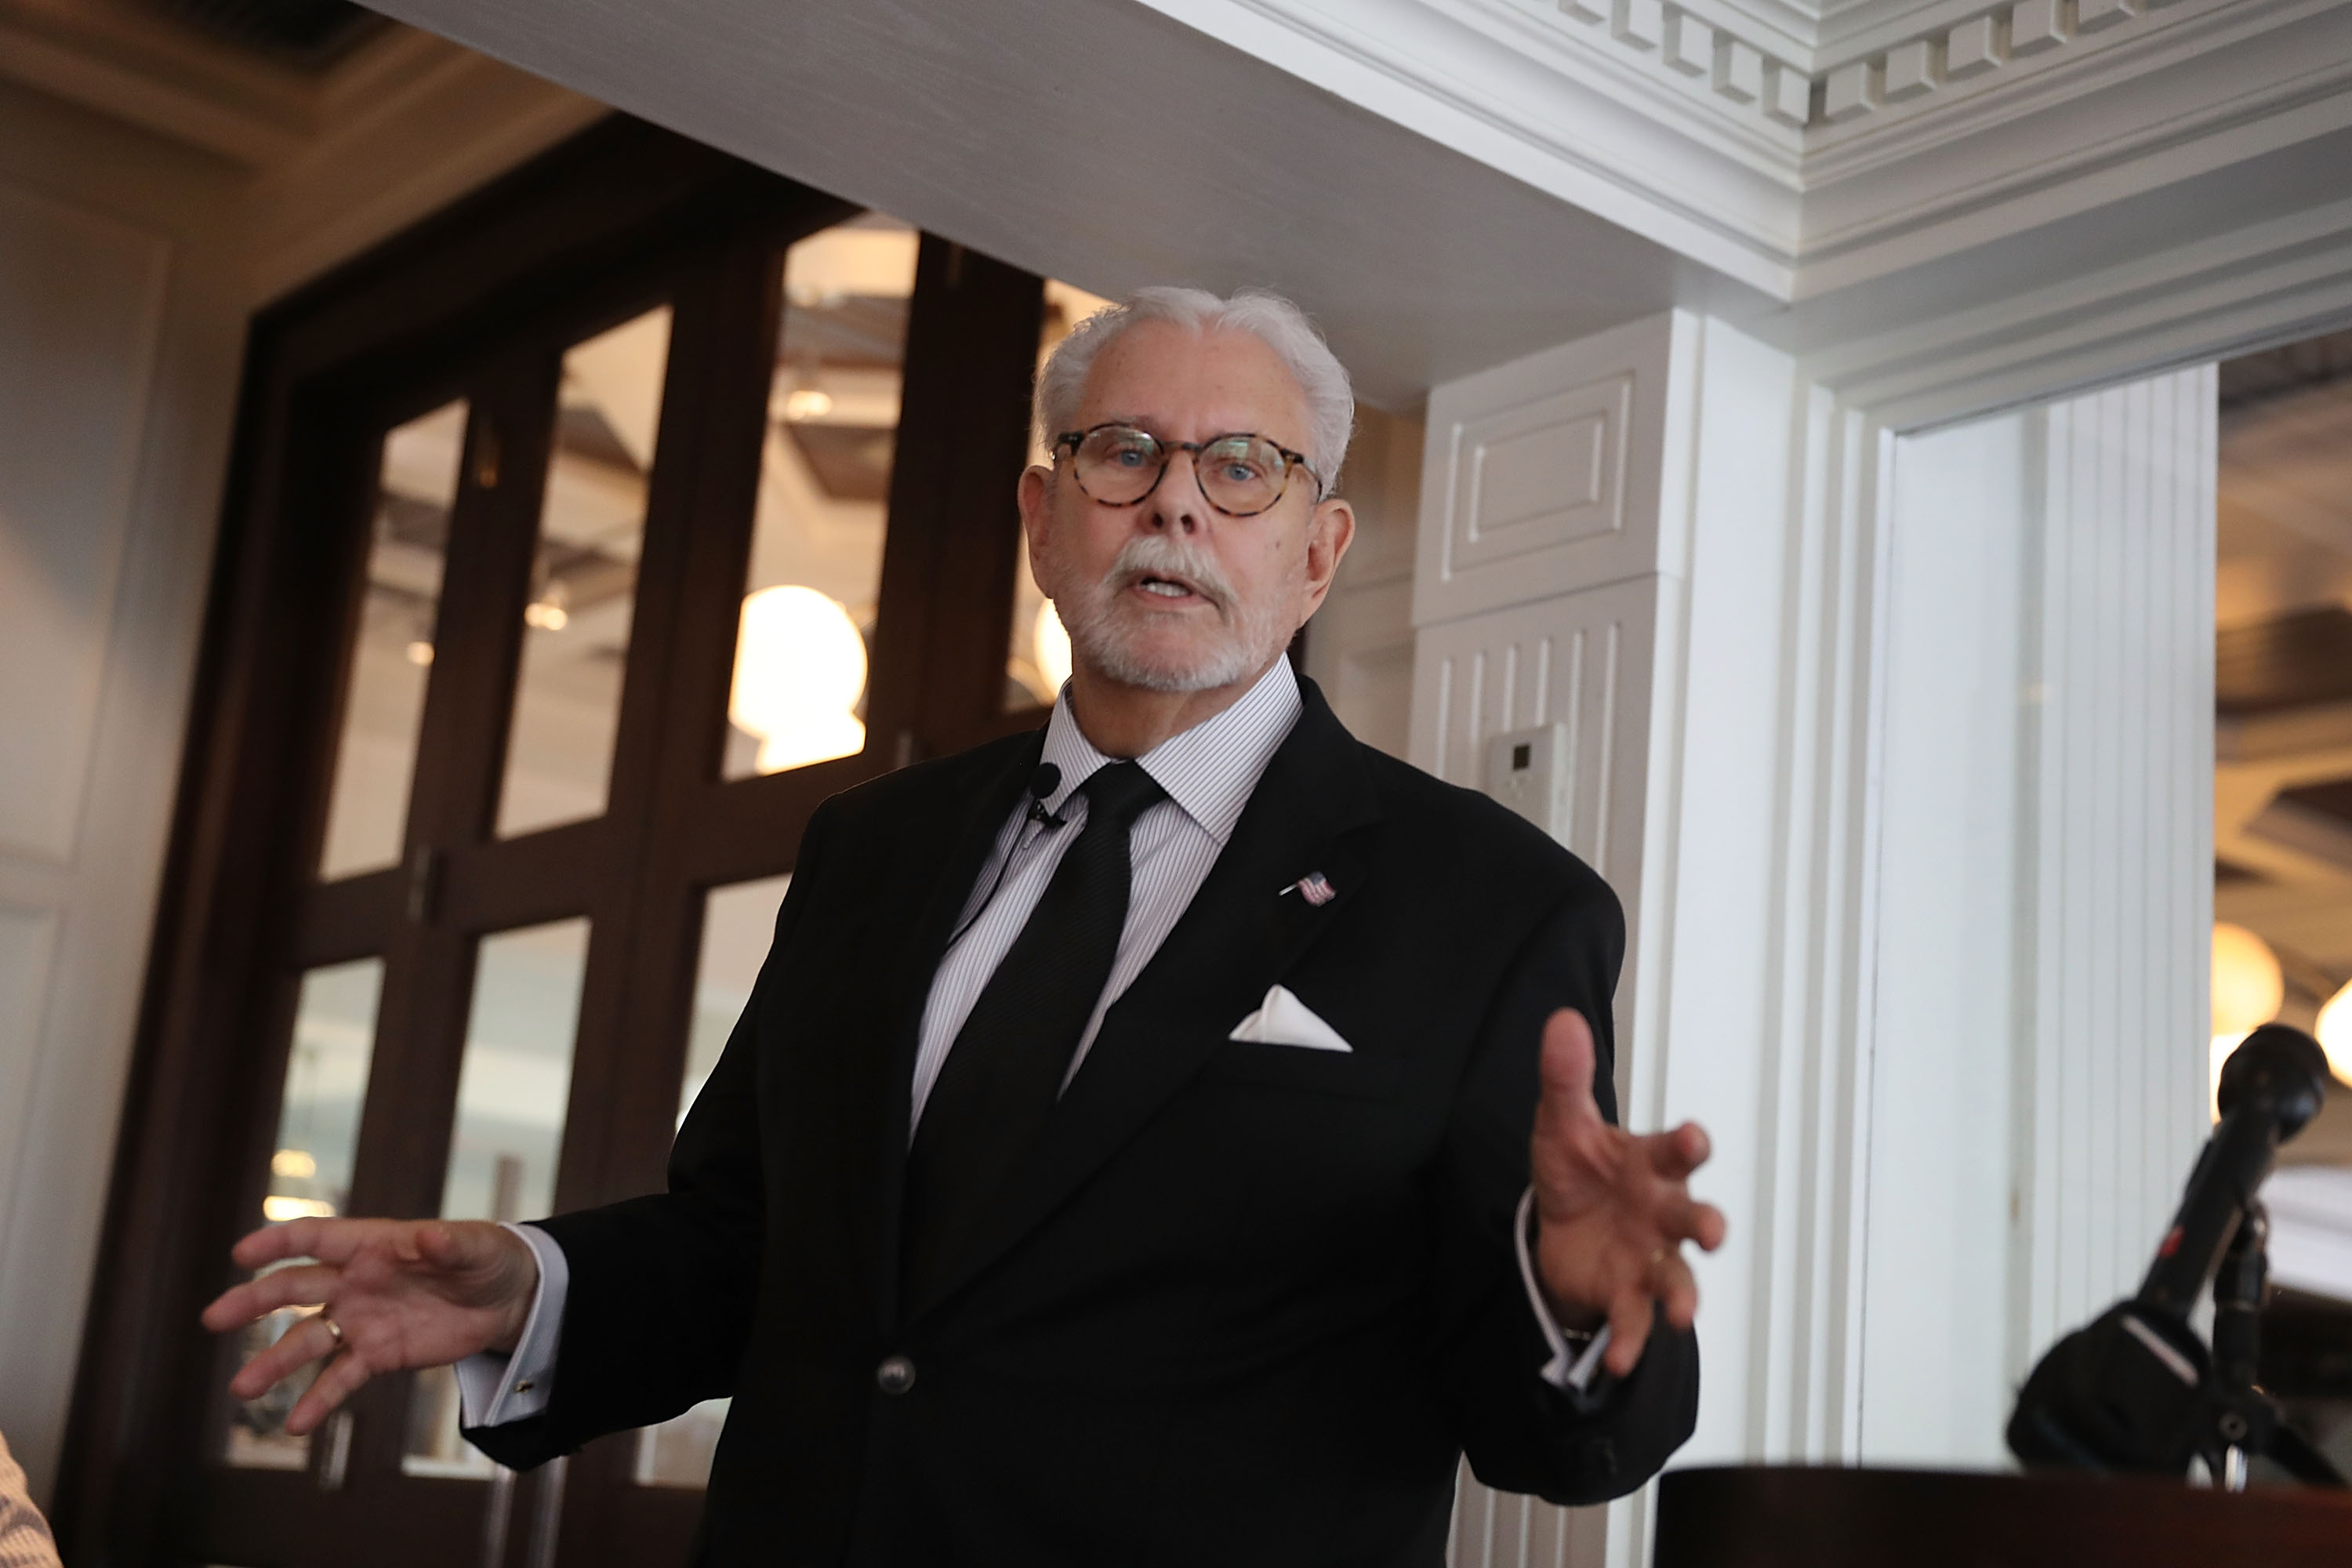 Tony Senecal, the former butler for Republican presidential candidate Donald Trump at his Mar-a-Lago estate, speaks to the Gold Coast Tiger Bay Club on June 8 in Boca Raton, Florida. (Joe Raedle/Getty Images)